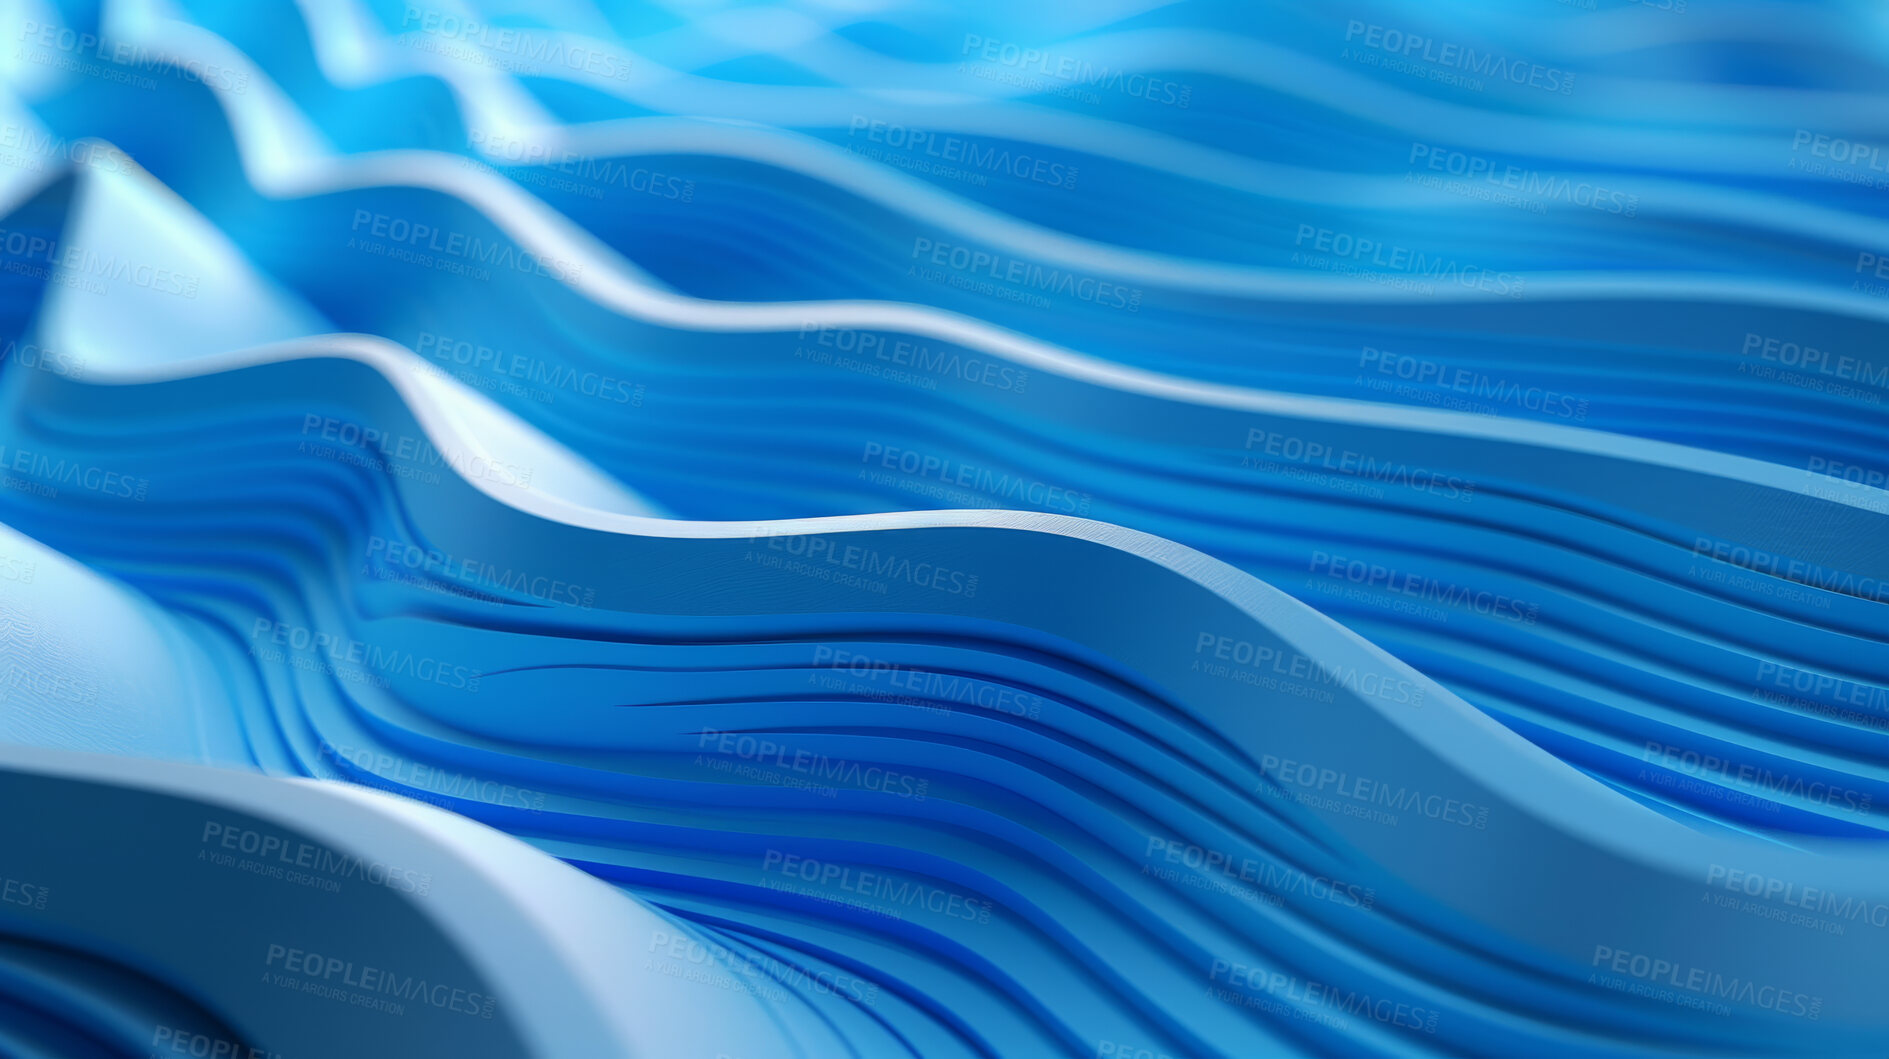 Buy stock photo 3d waves, abstract and blue texture, art or wallpaper illustration of fabric on background. Pattern, flow and design with gradient of motion, ocean or graphic of liquid on creative backdrop closeup